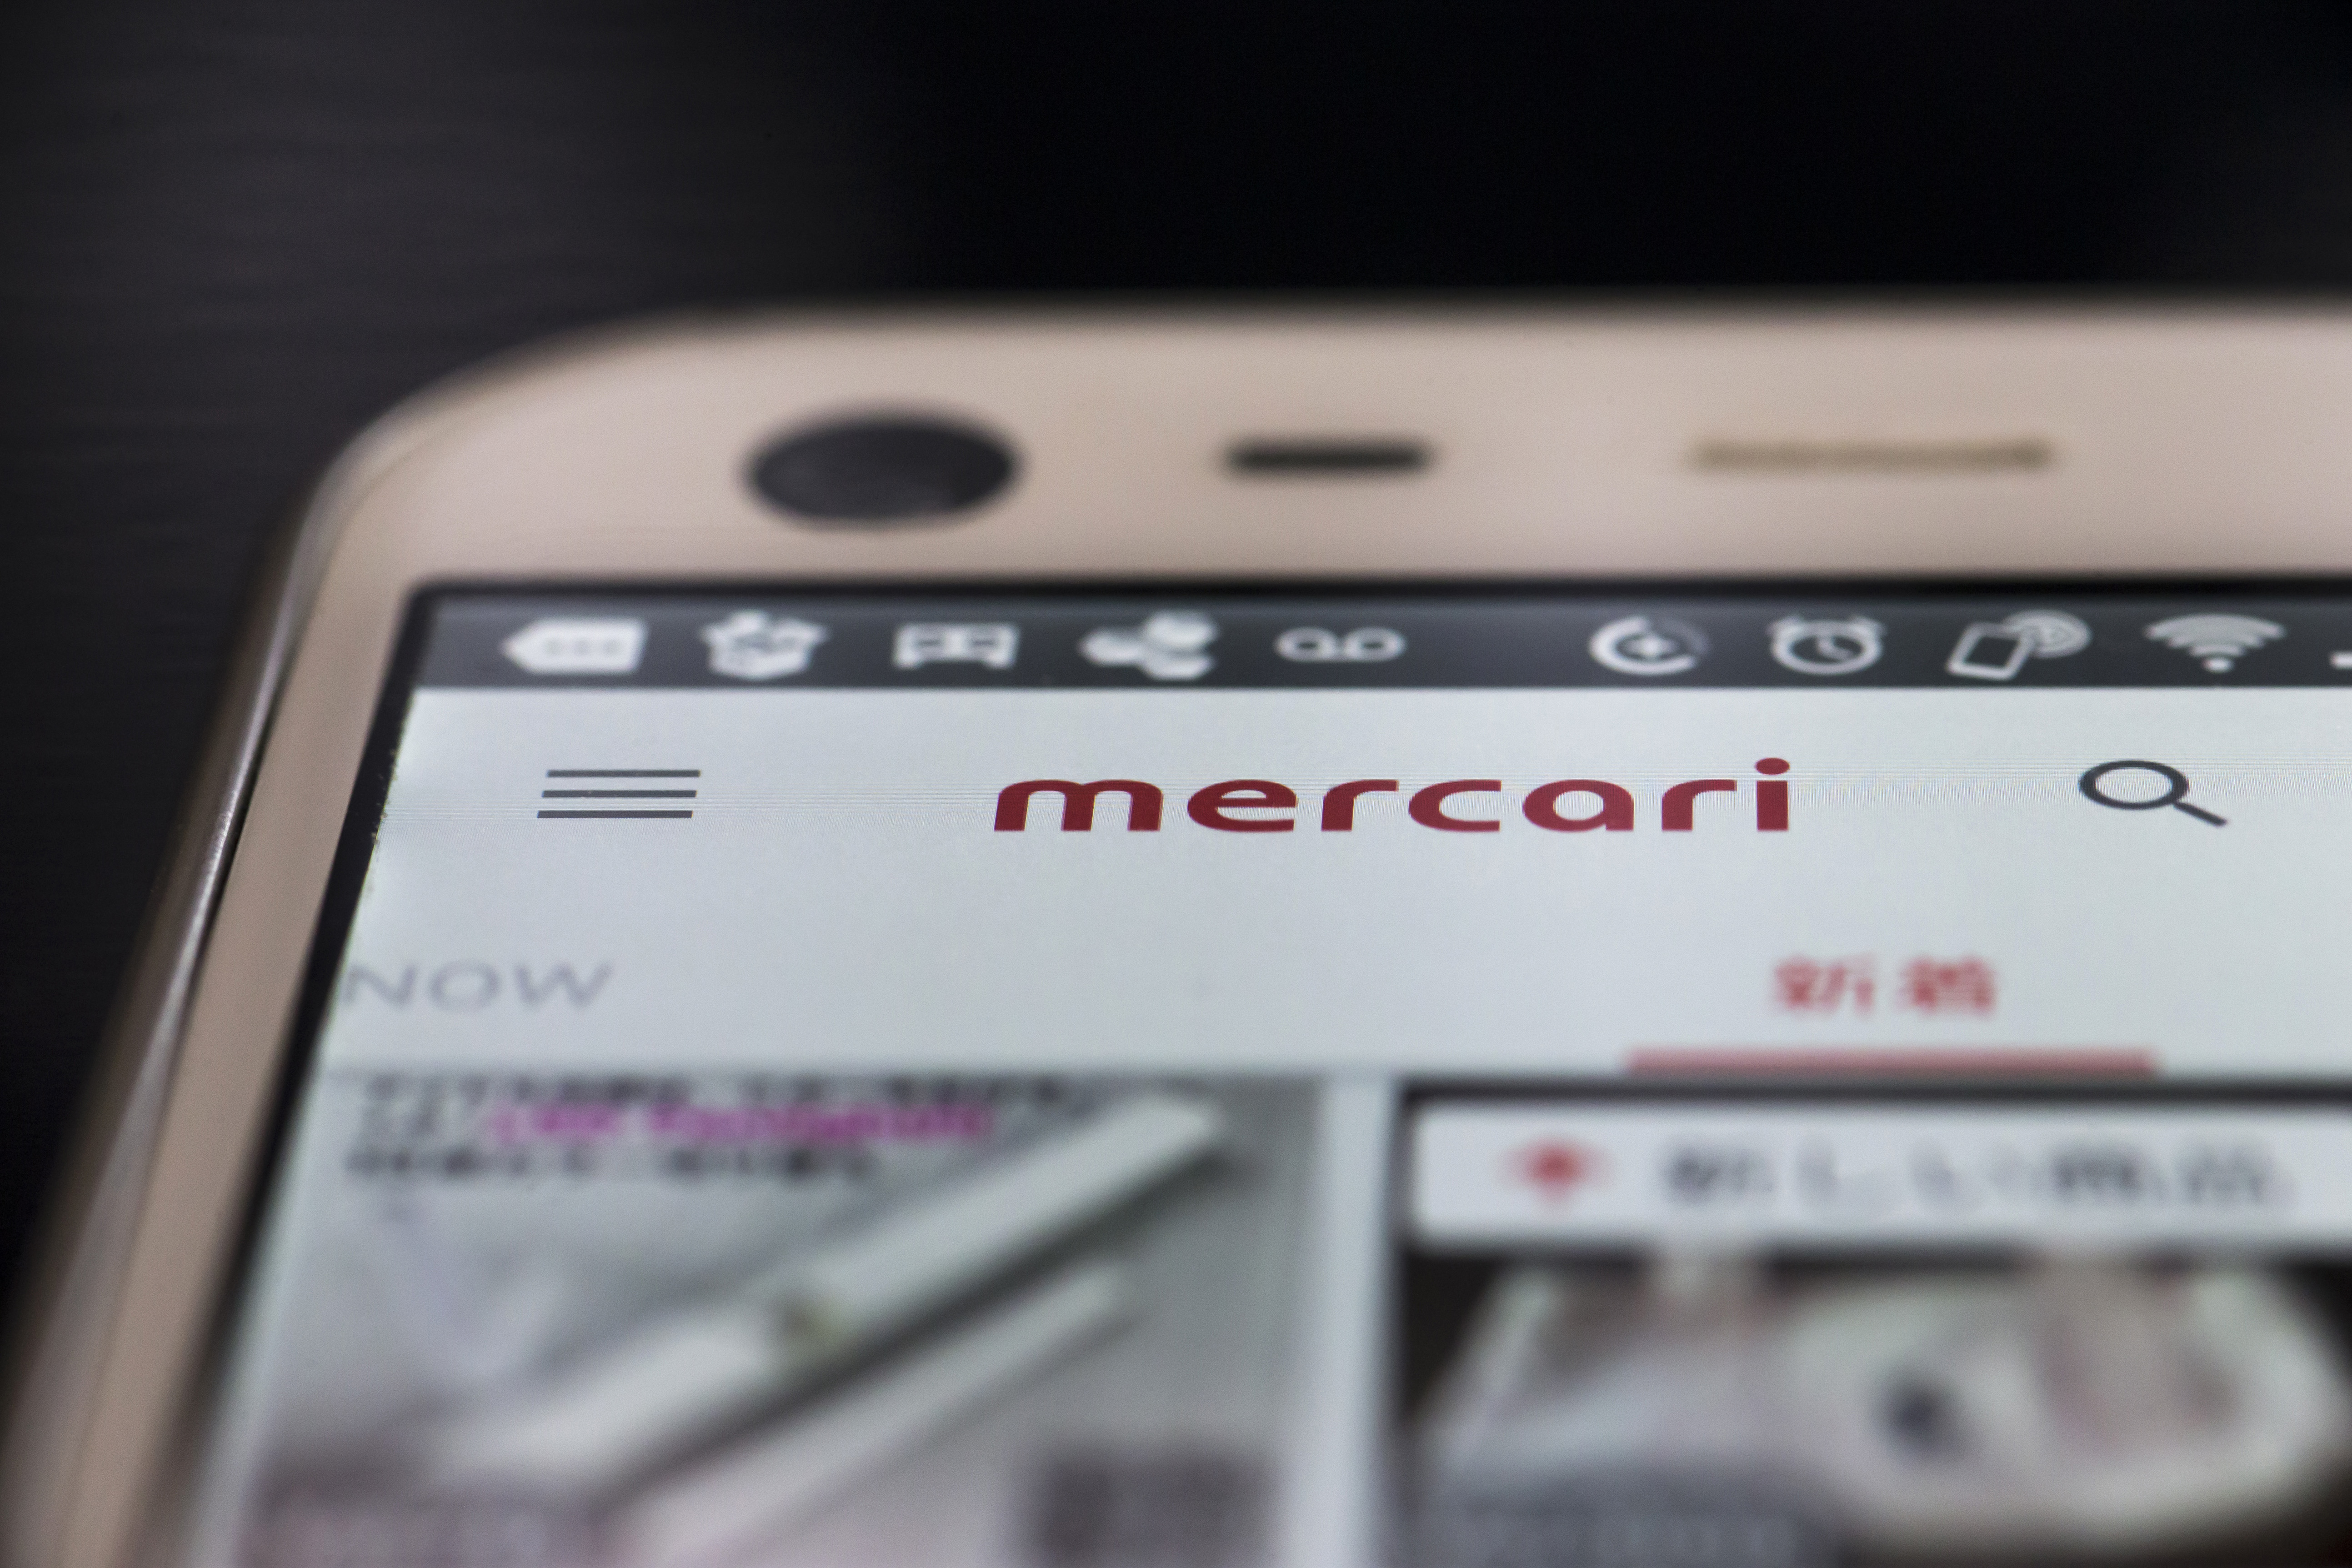 The Mercari flea-market app is seen on a smartphone screen. Homework-by-proxy is said to be rampant on the internet, with services aimed at busy parents of school students desperate for help completing their assignments at the end of summer recess. | BLOOMBERG